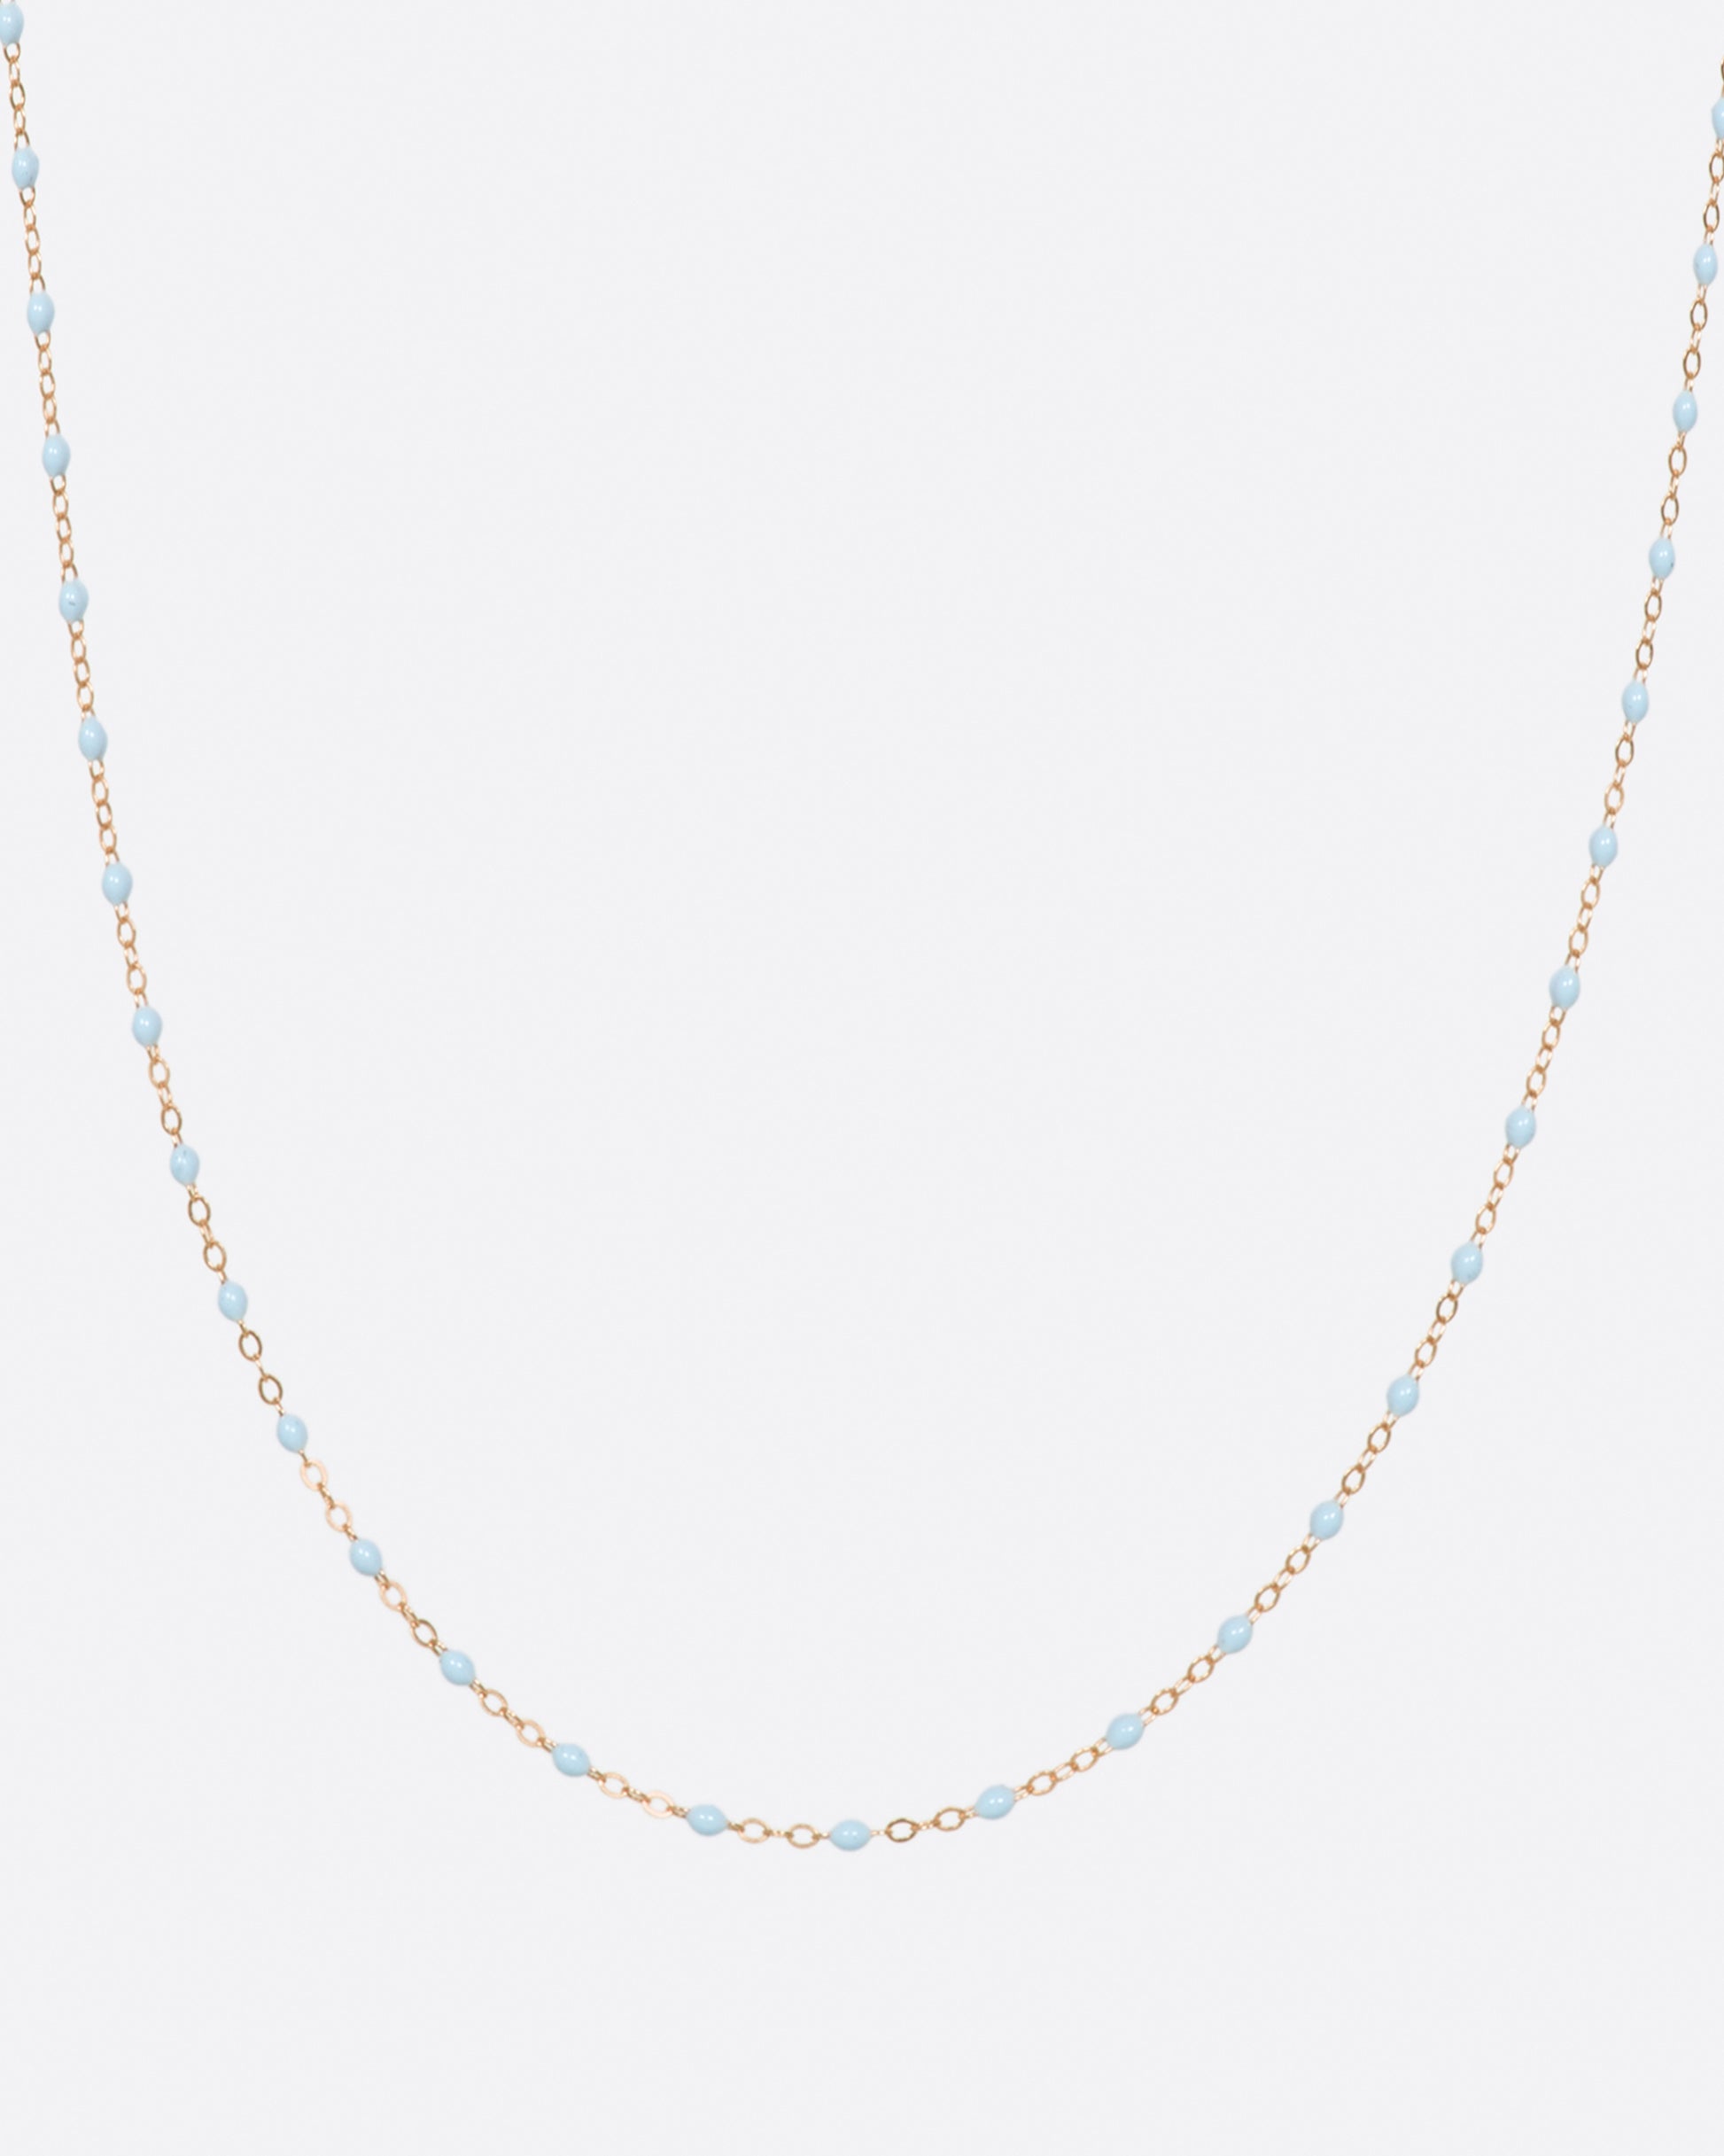 Thin 18k gold chain necklace with resin beads. Each necklace is hand dipped in melted resin to create the beaded effect. 